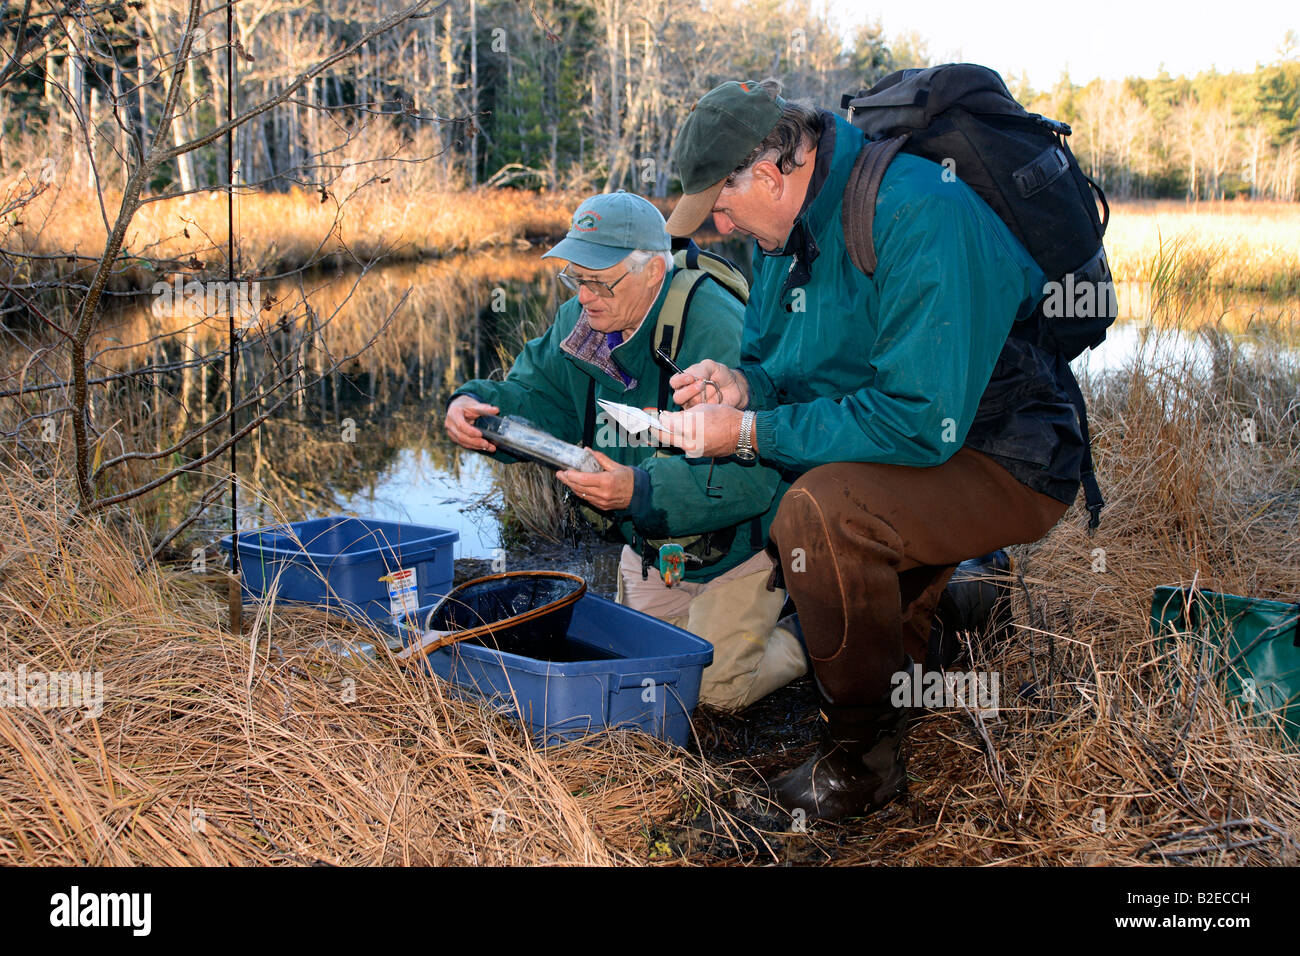 scientific researchers or Biologists studying the environment or animals such as fish in a stream or near a stream or lake Stock Photo